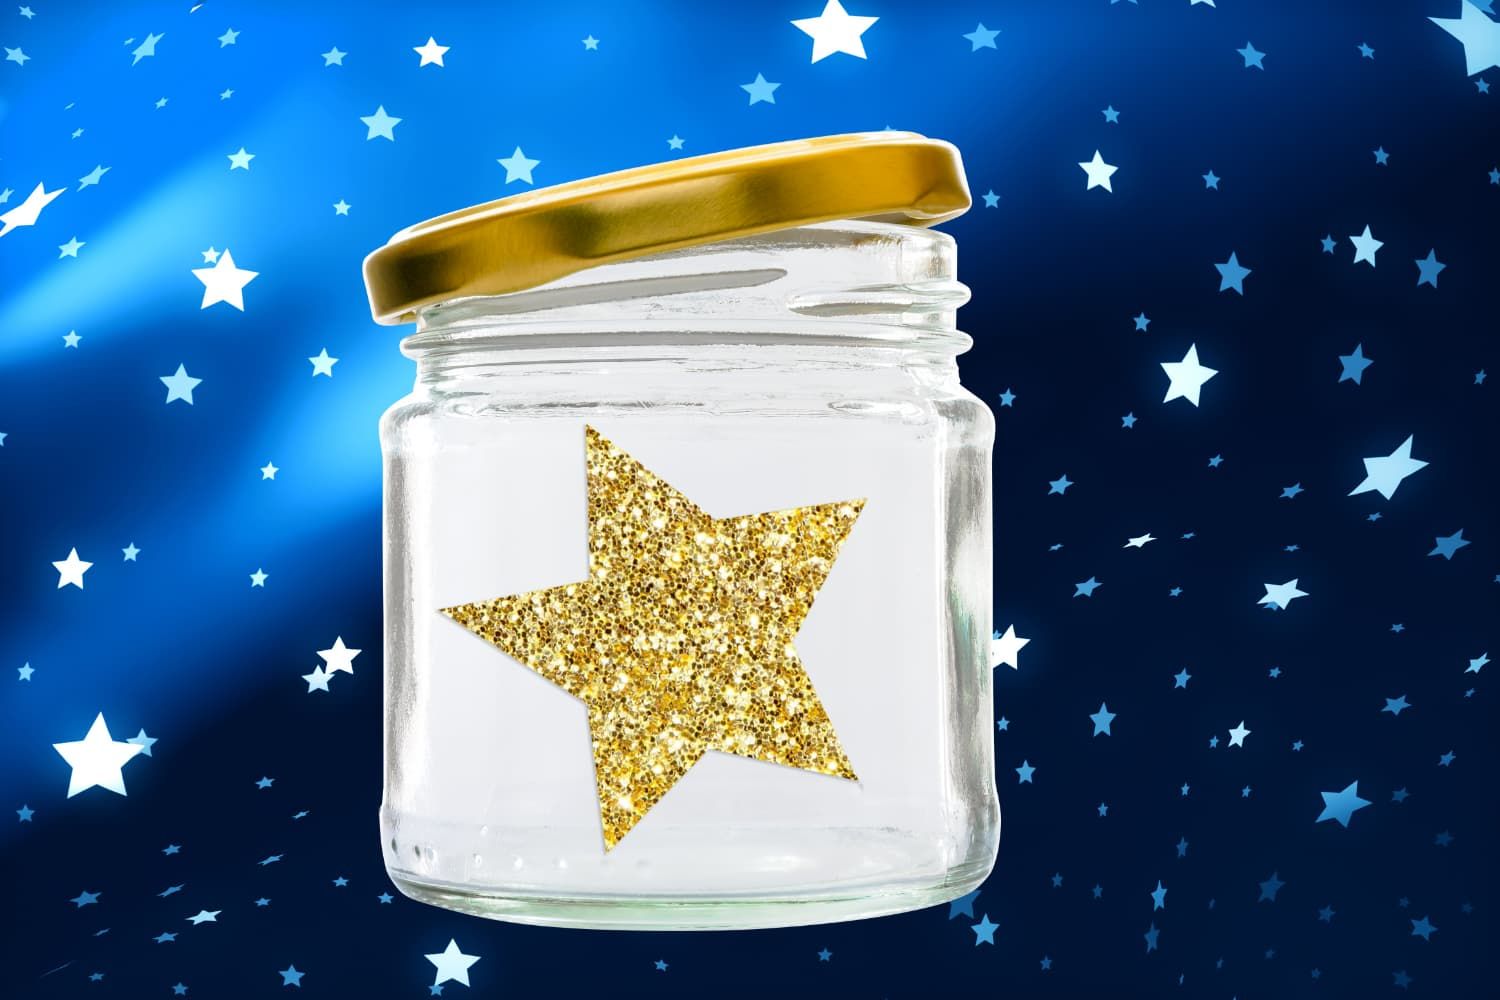 Object%20lesson%20-%20Stars%20in%20a%20jar-6132cbc5 Sun, moon and stars